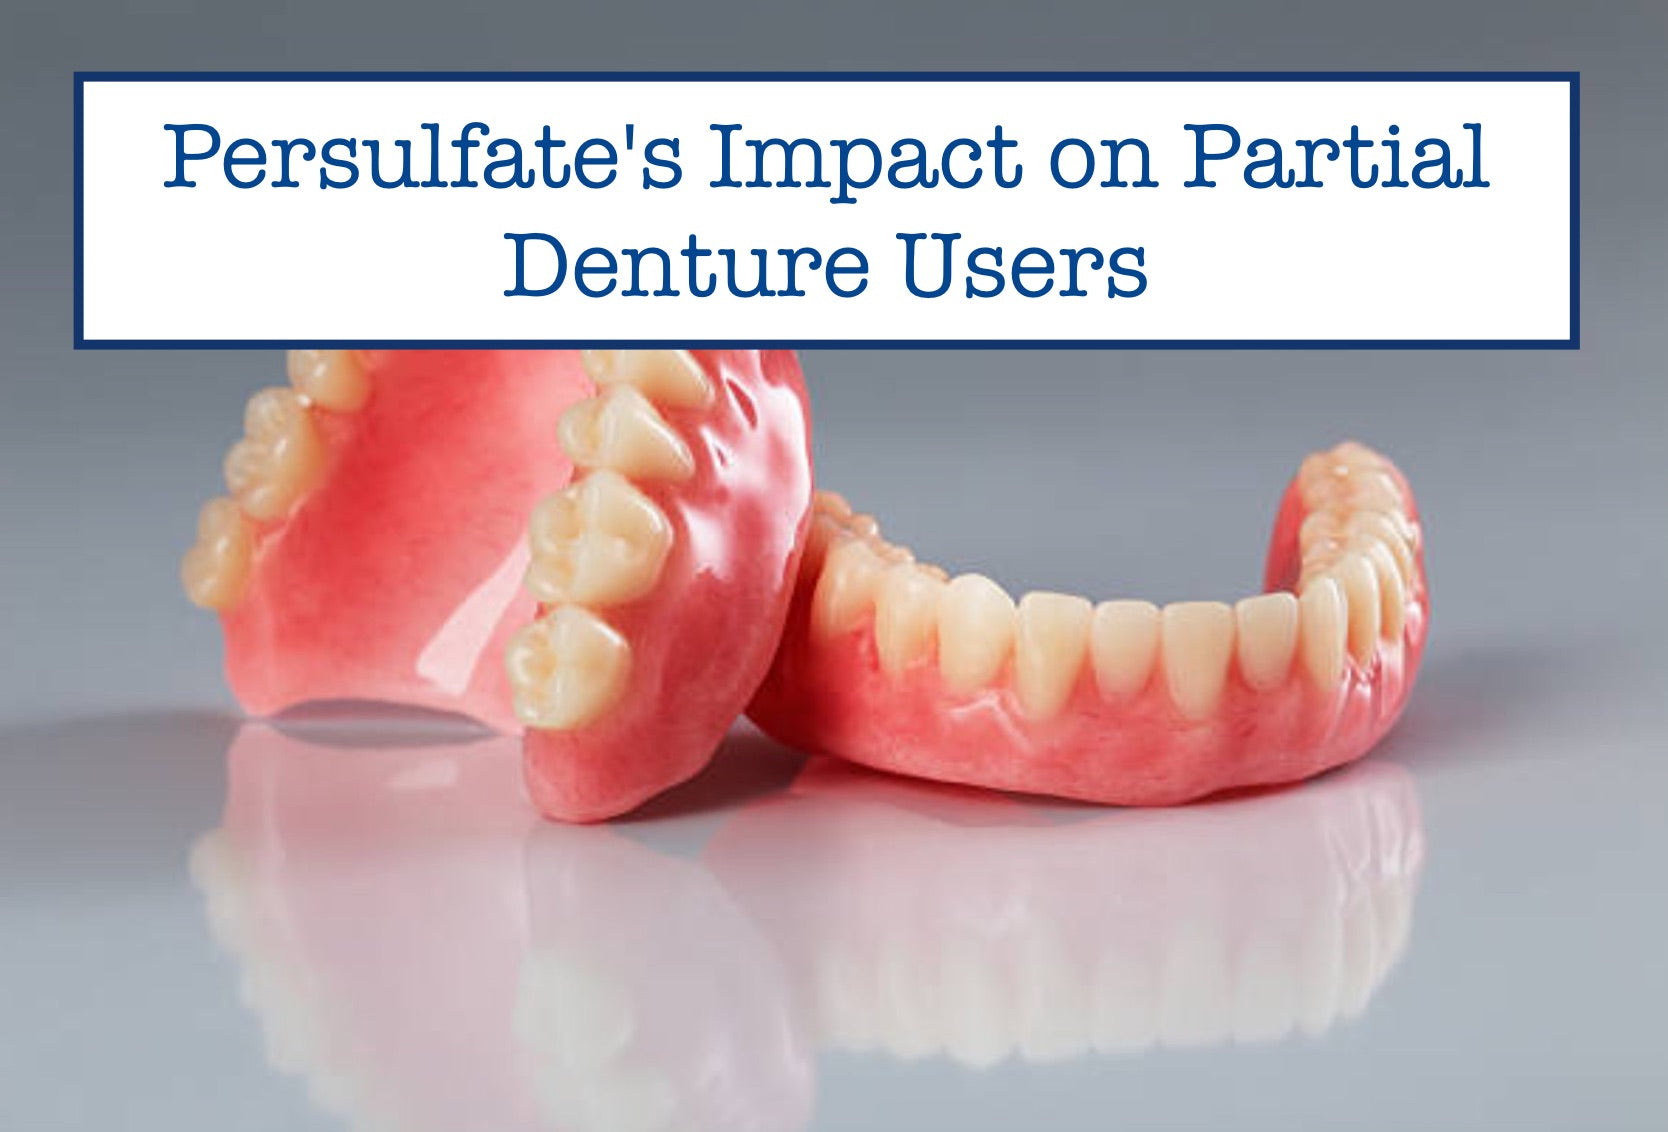 Persulfate's Impact on Partial Denture Users